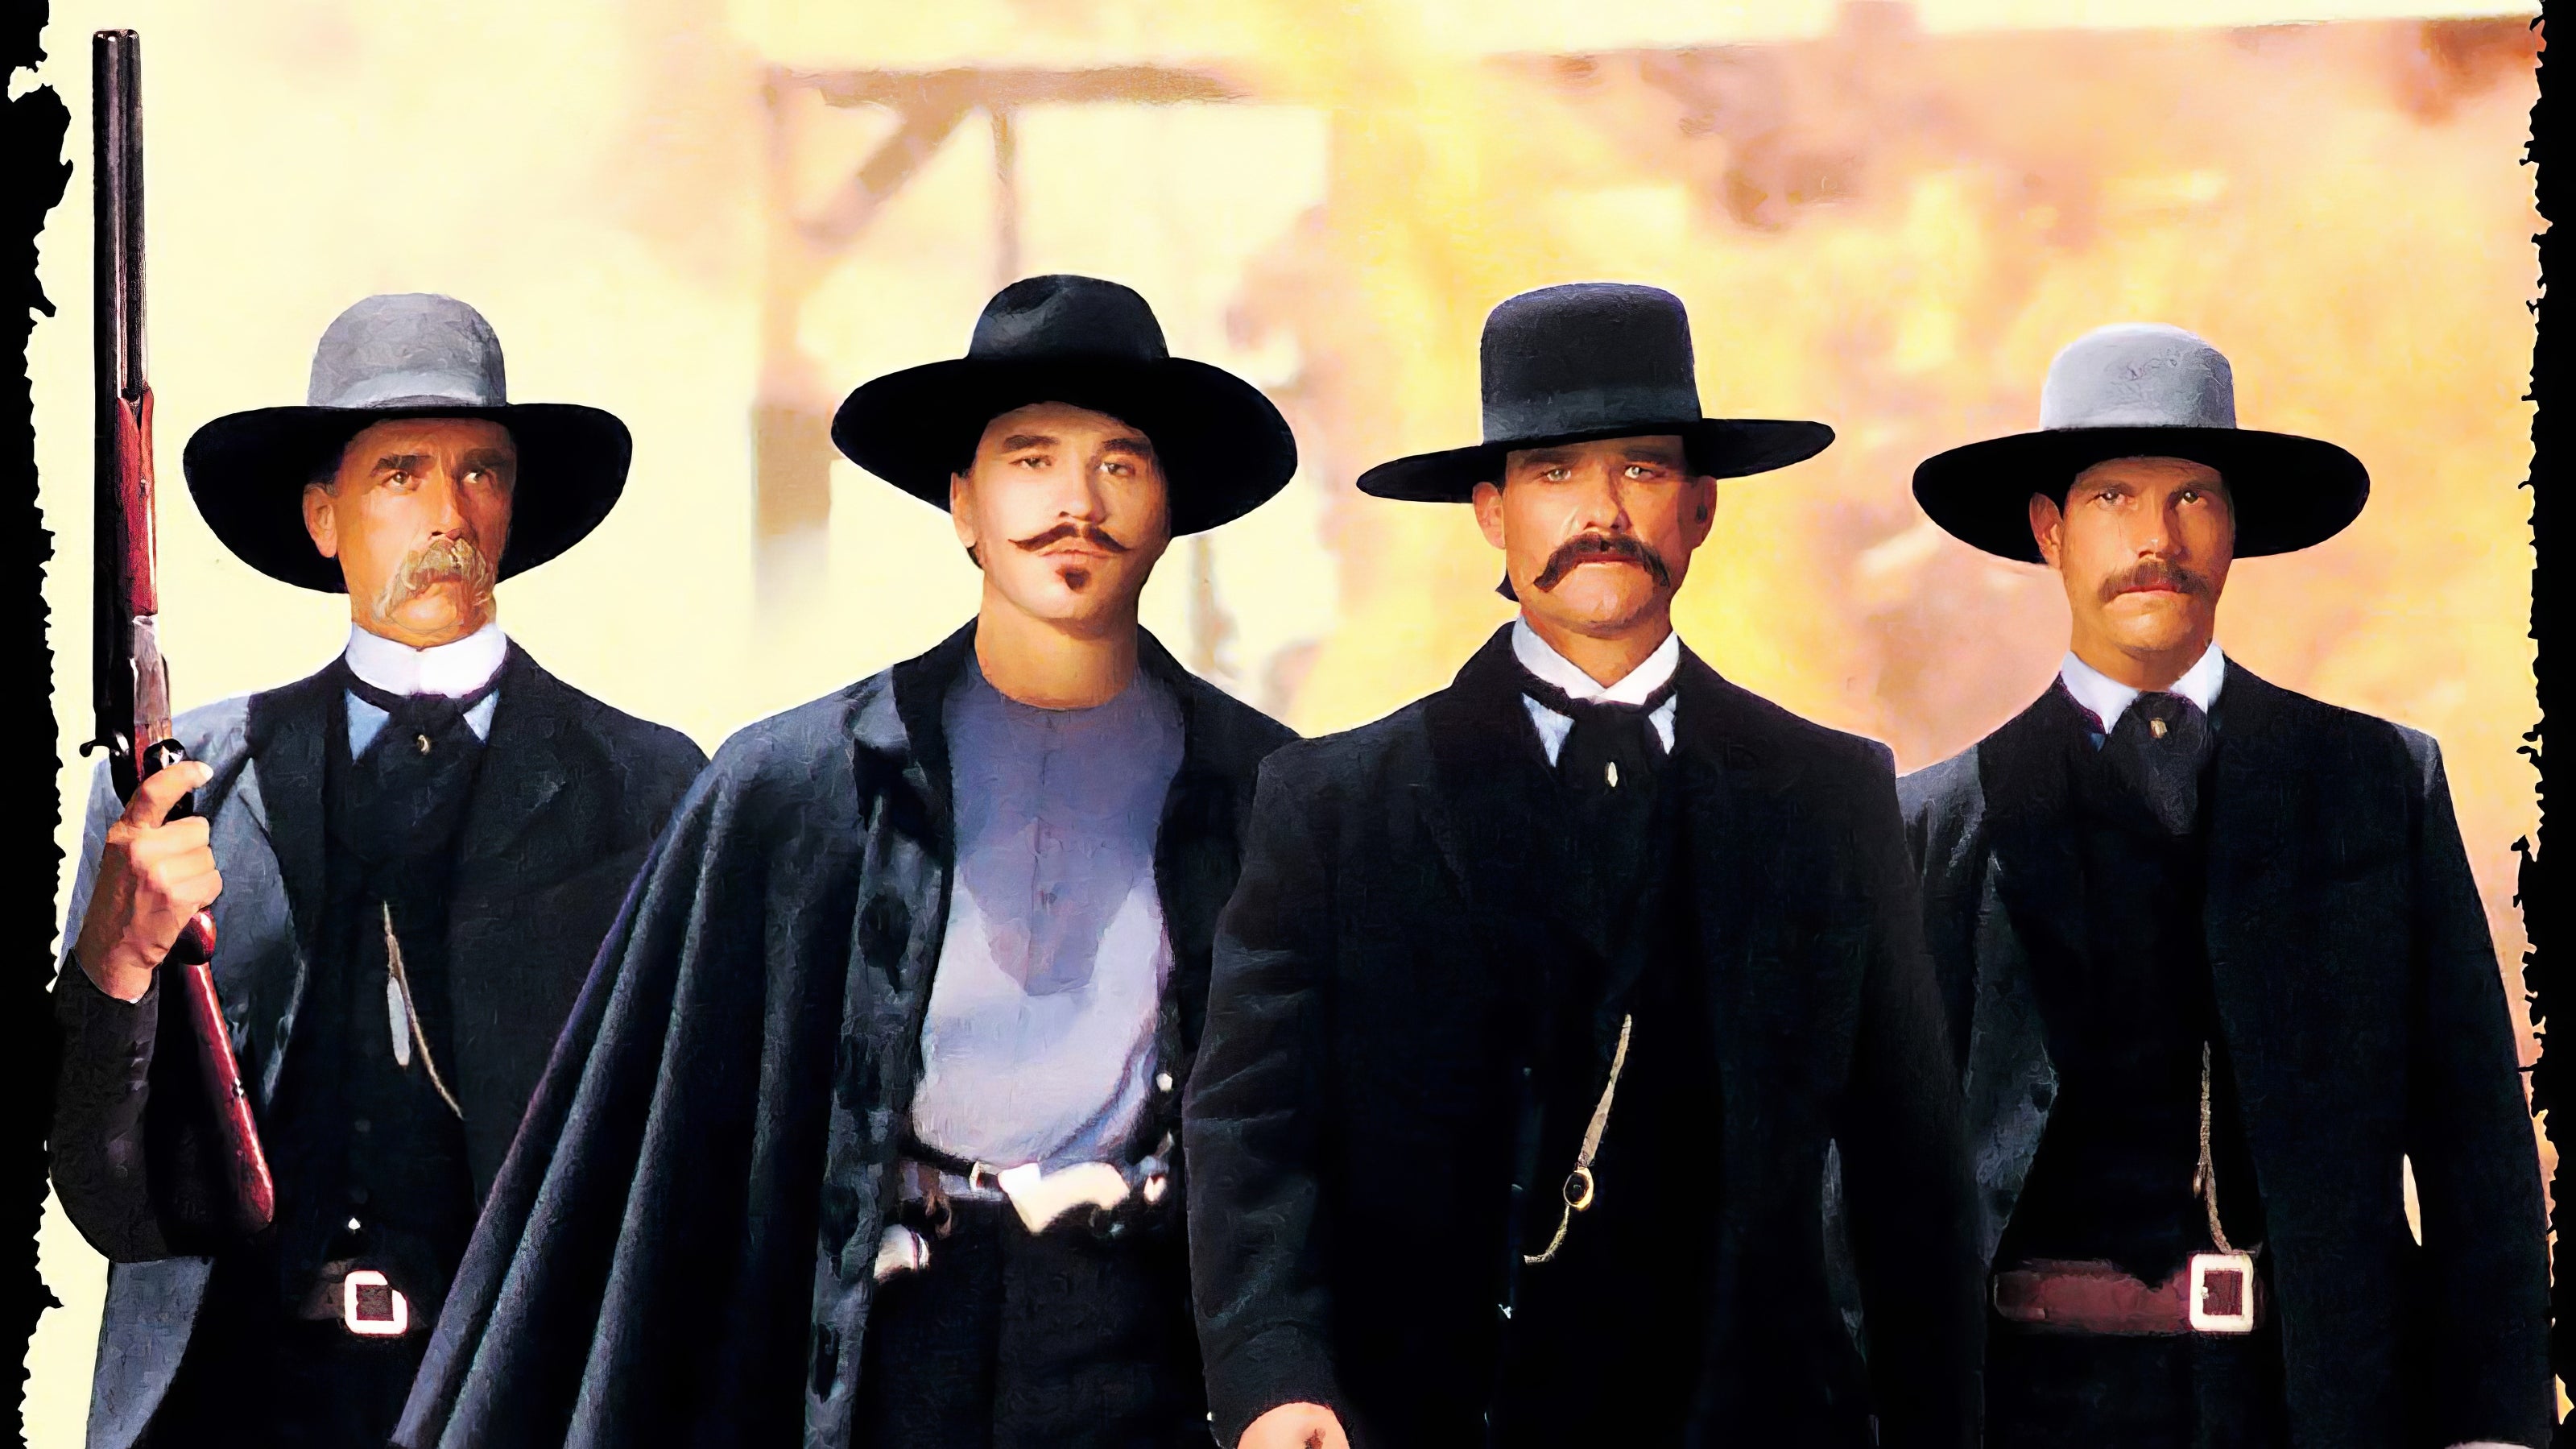 The Making of Tombstone: Behind the Scenes of the Classic Modern Western (Book Notes)